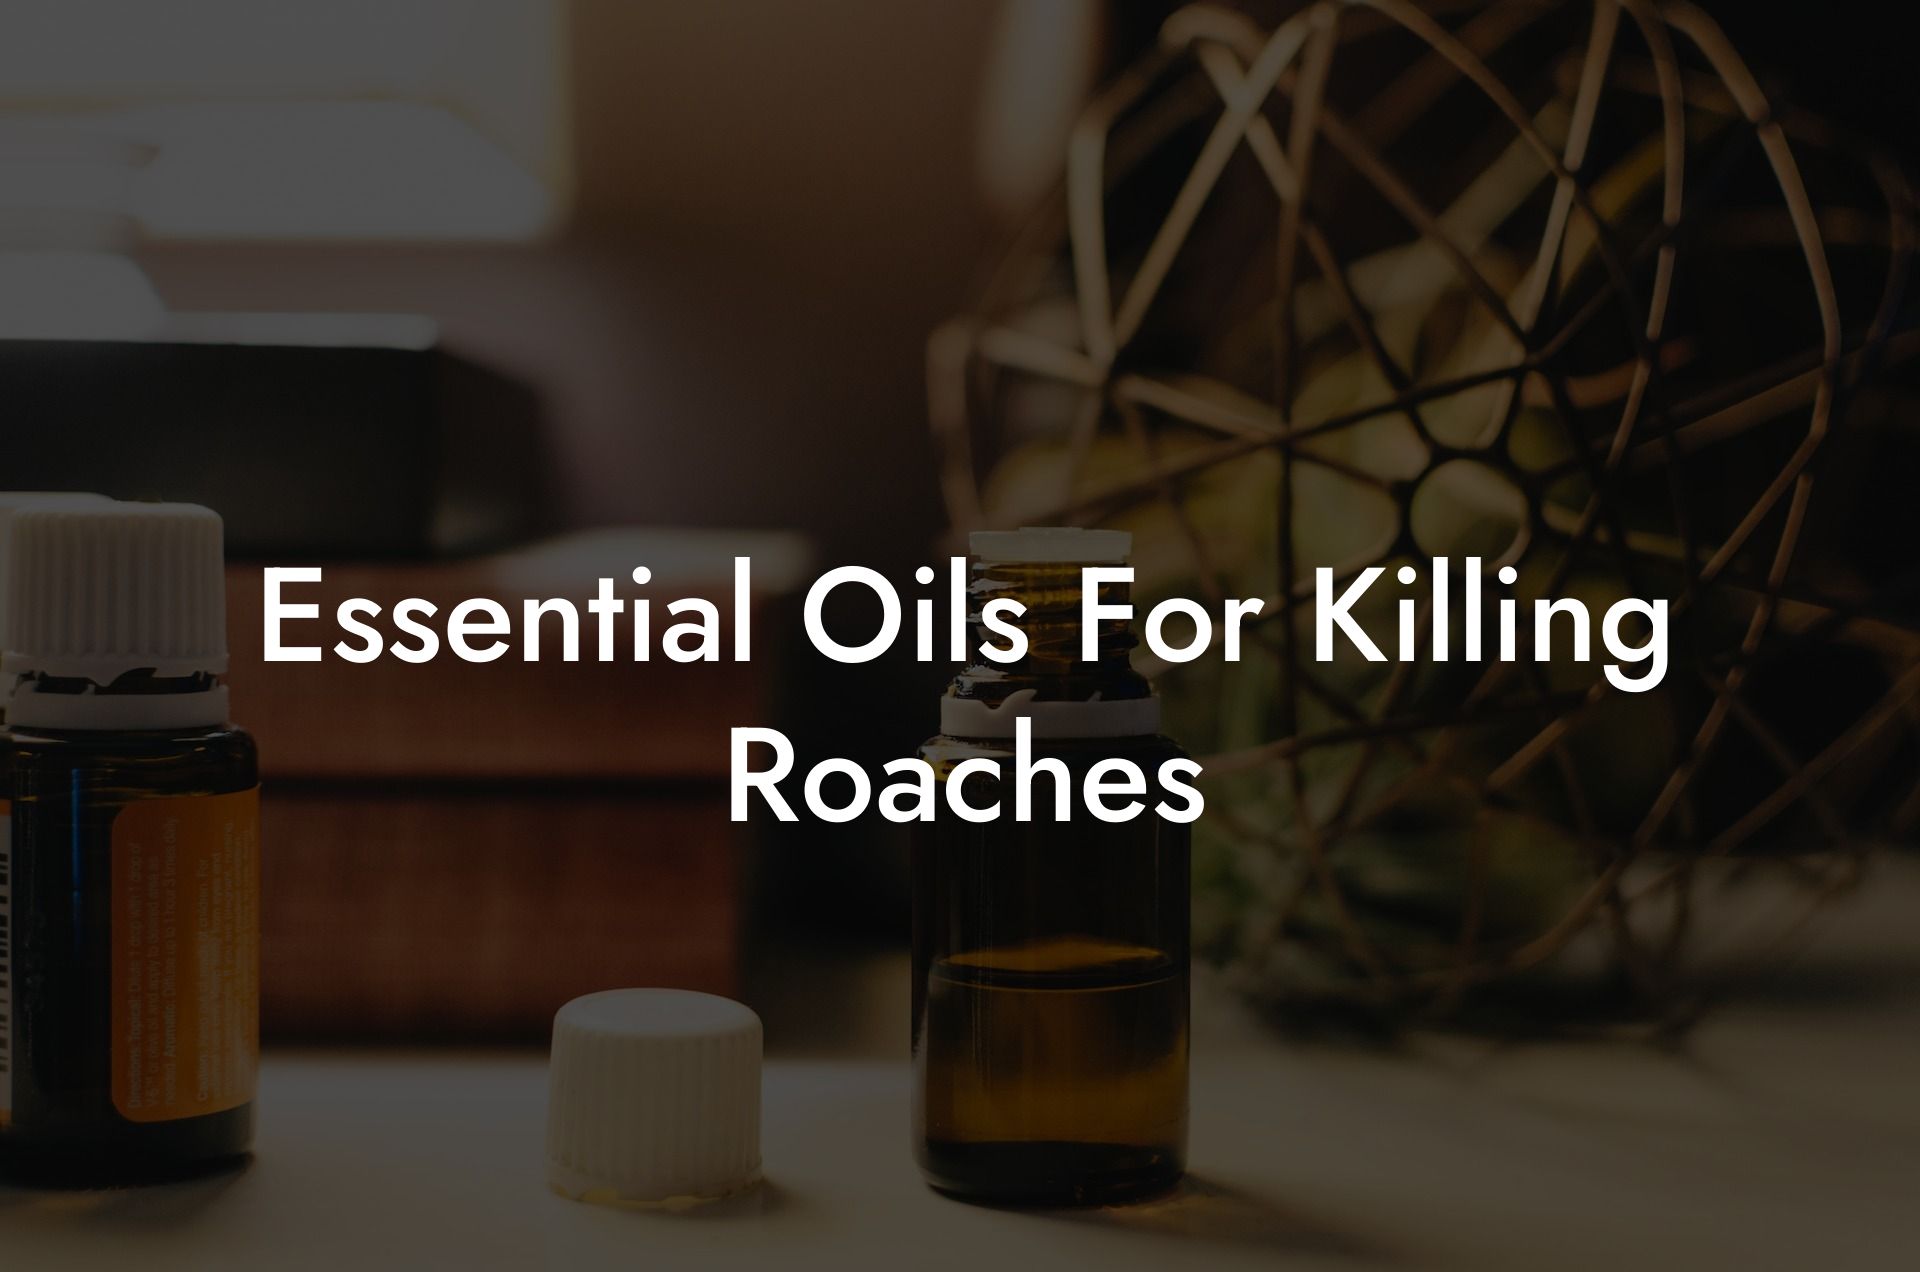 Essential Oils For Killing Roaches